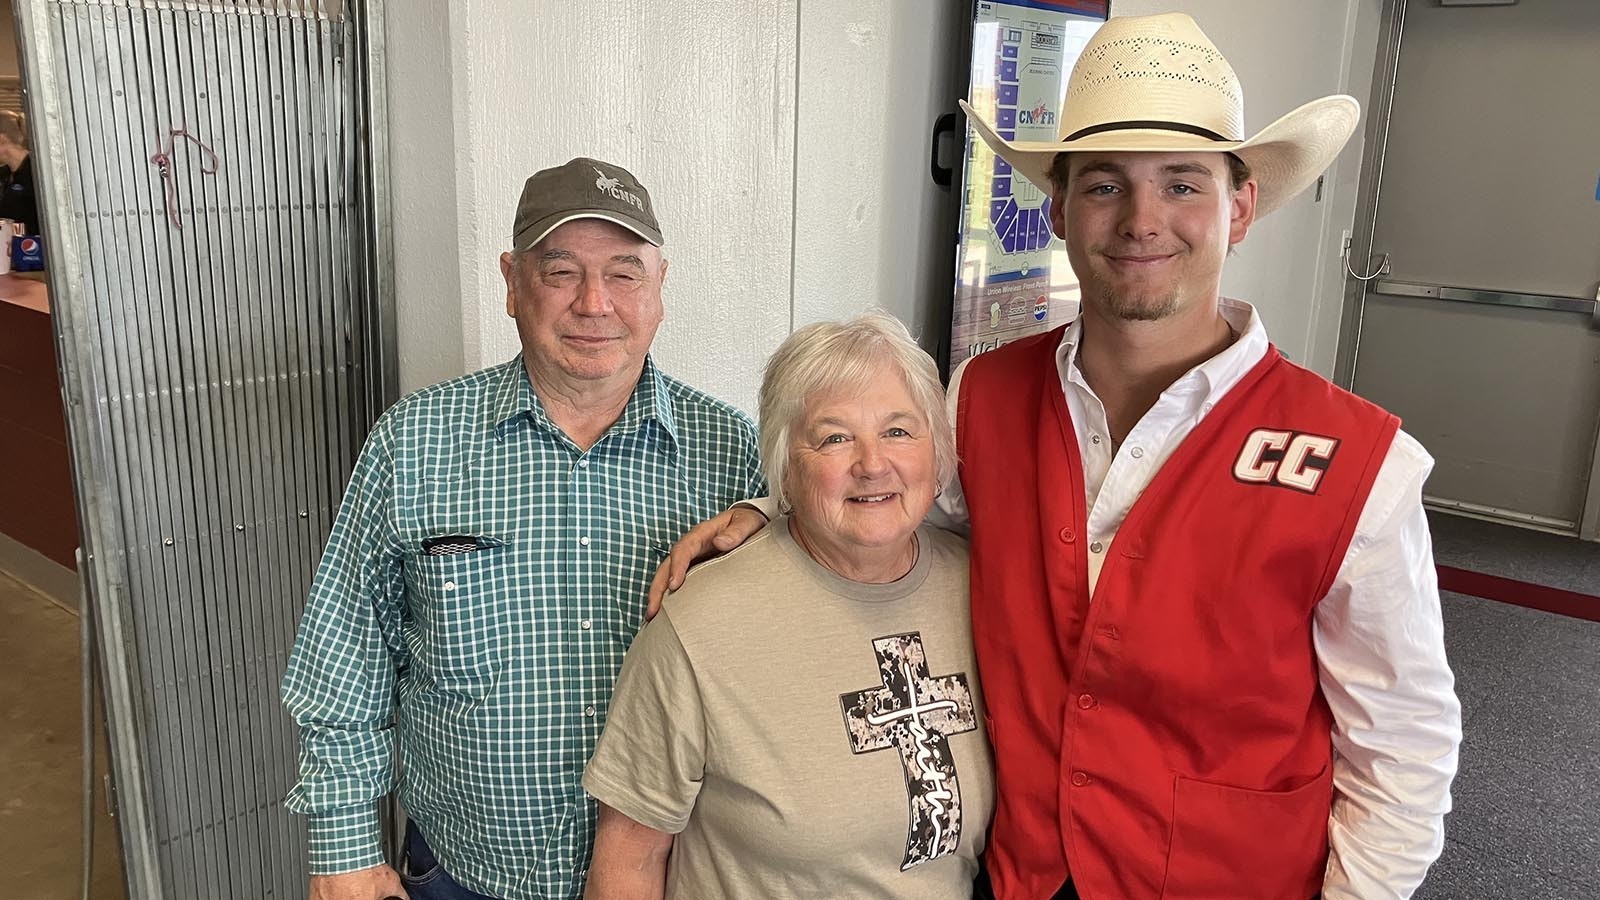 The Elshere family has a history of rodeo competitors. Grandfather Jim Elshere rode bareback broncs and bulls in high school. From left are Jim Elshere, wife Lana, and Talon.